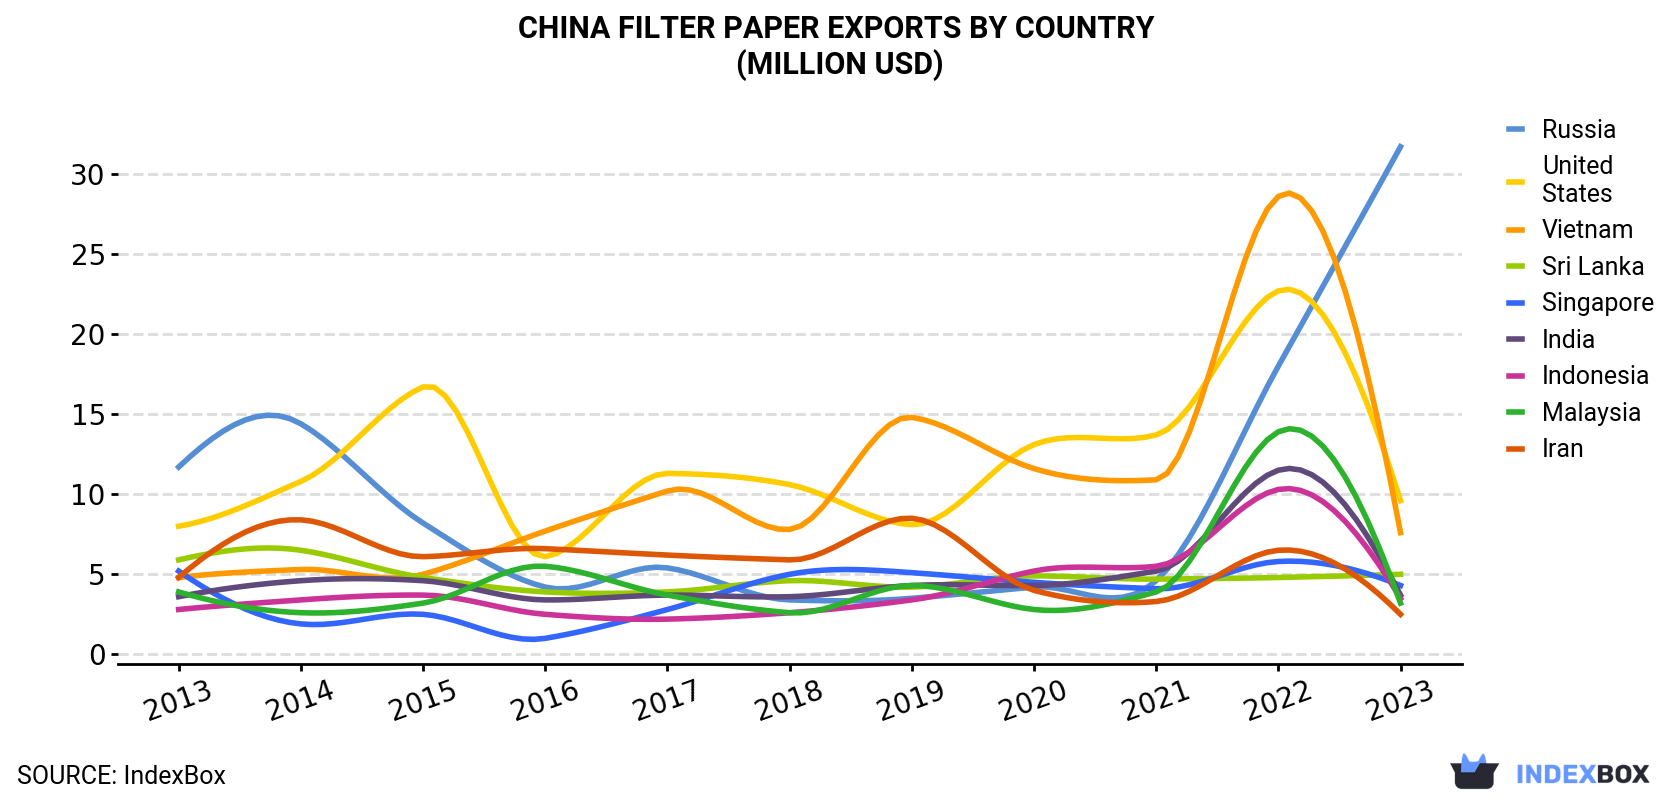 China Filter Paper Exports By Country (Million USD)